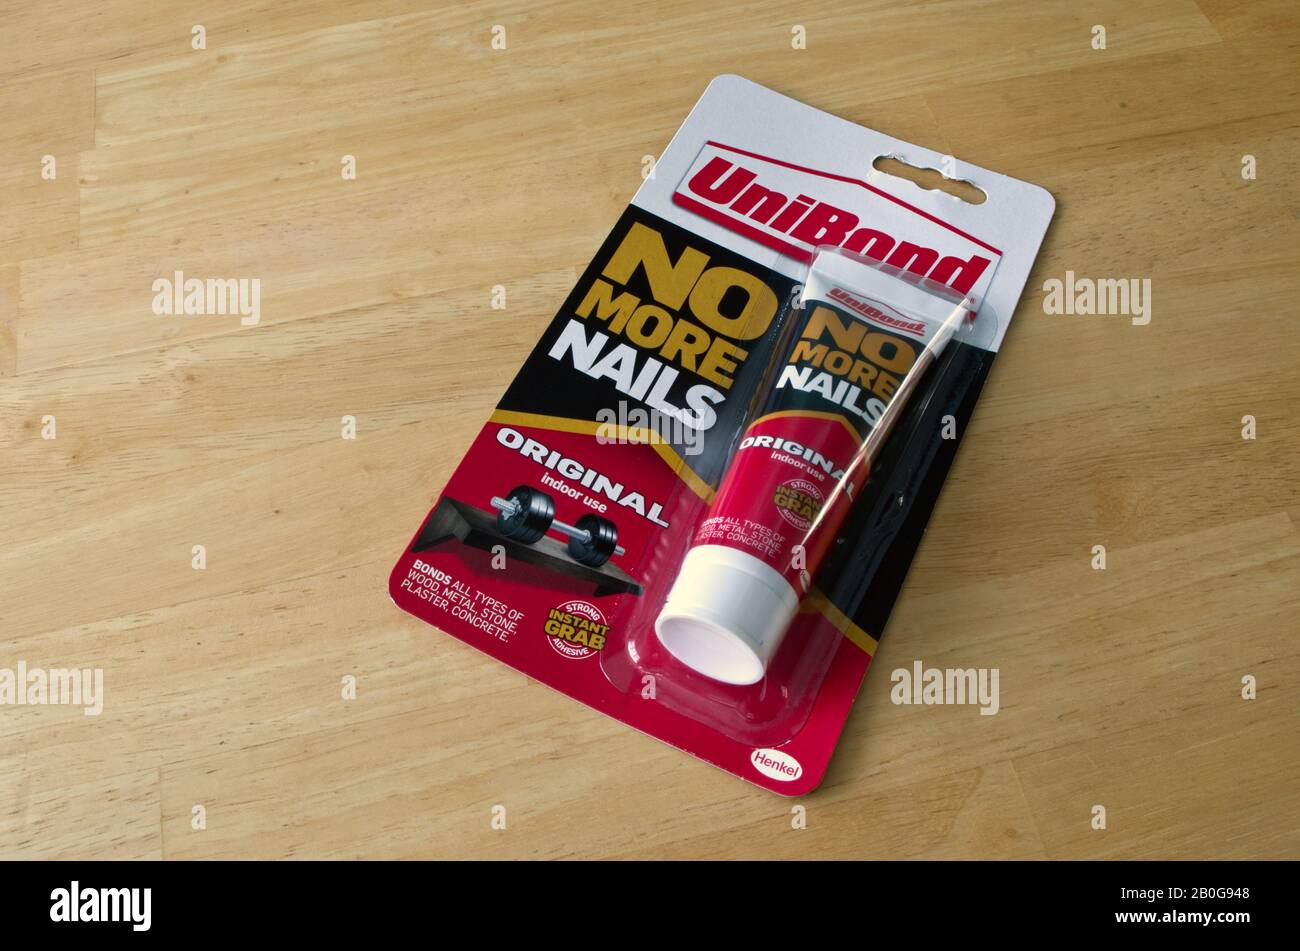 Unibond No More Nails Adhesive Glue by Henkel in a Blister Pack, UK Stock Photo